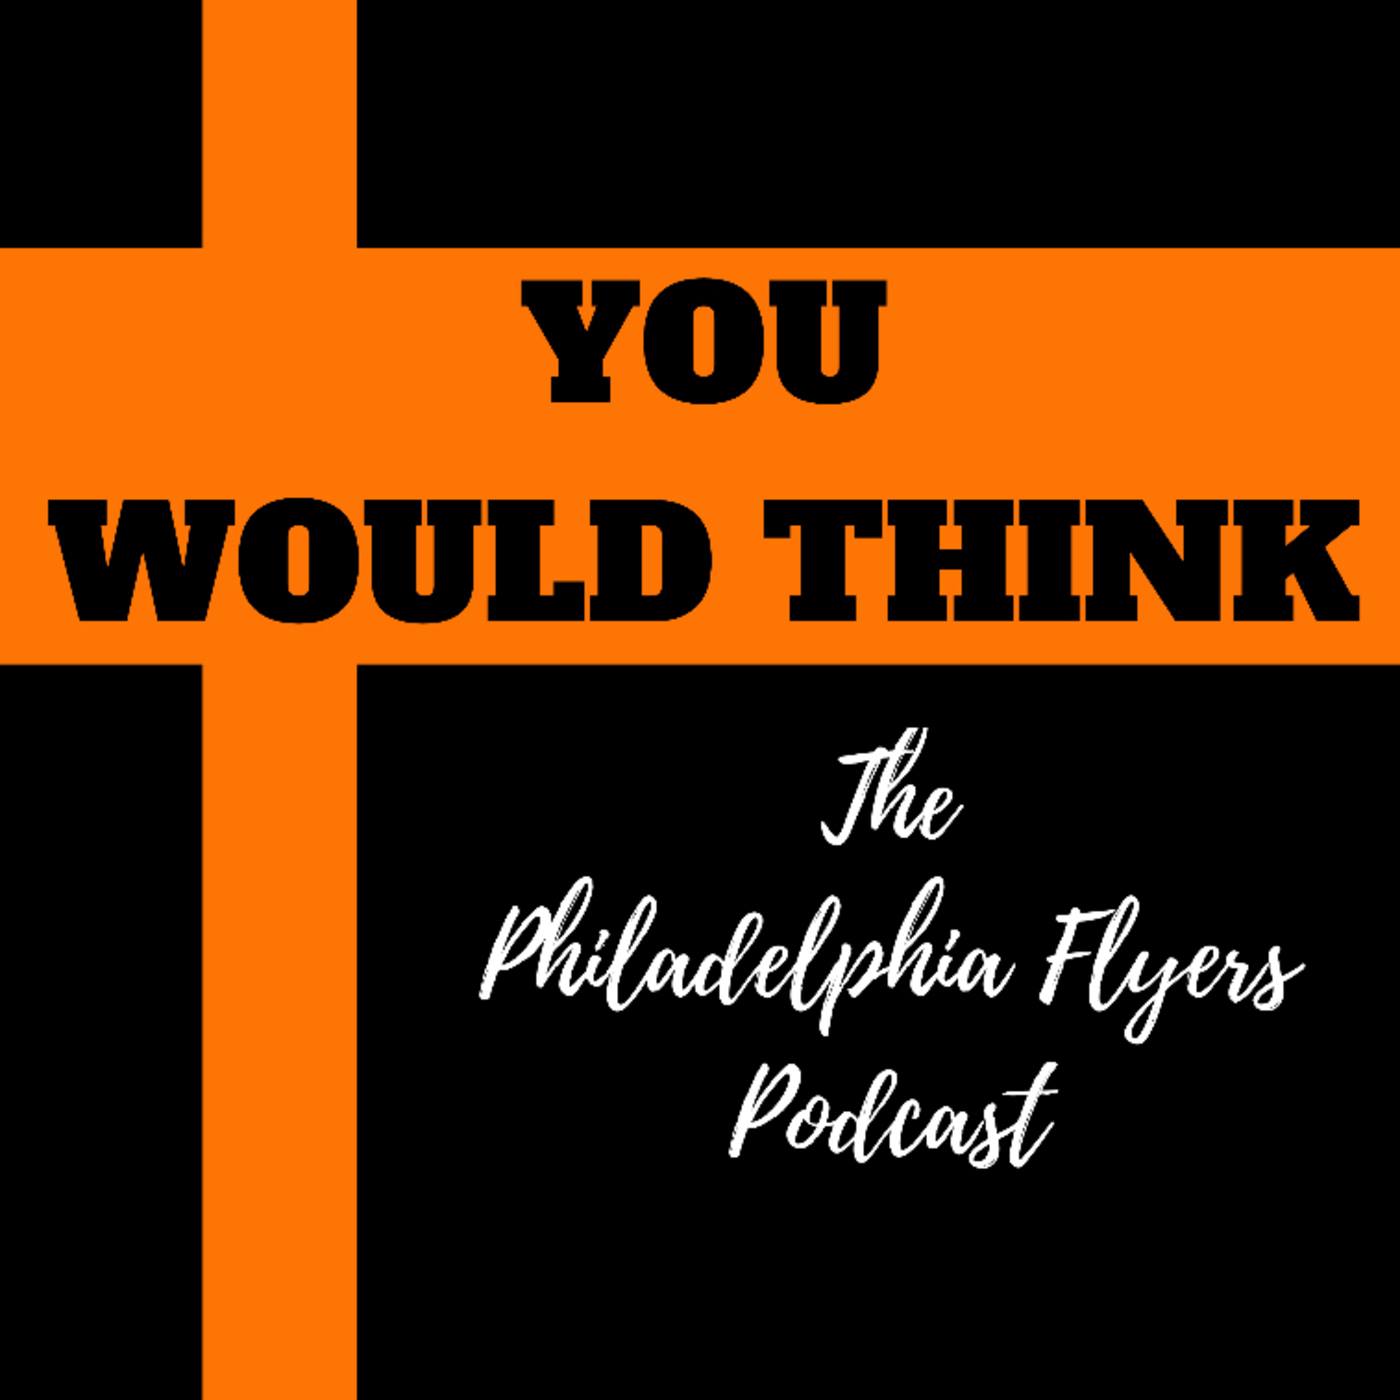 YWT: The Philadelphia Flyers Podcast – YWT #201 – What They Are